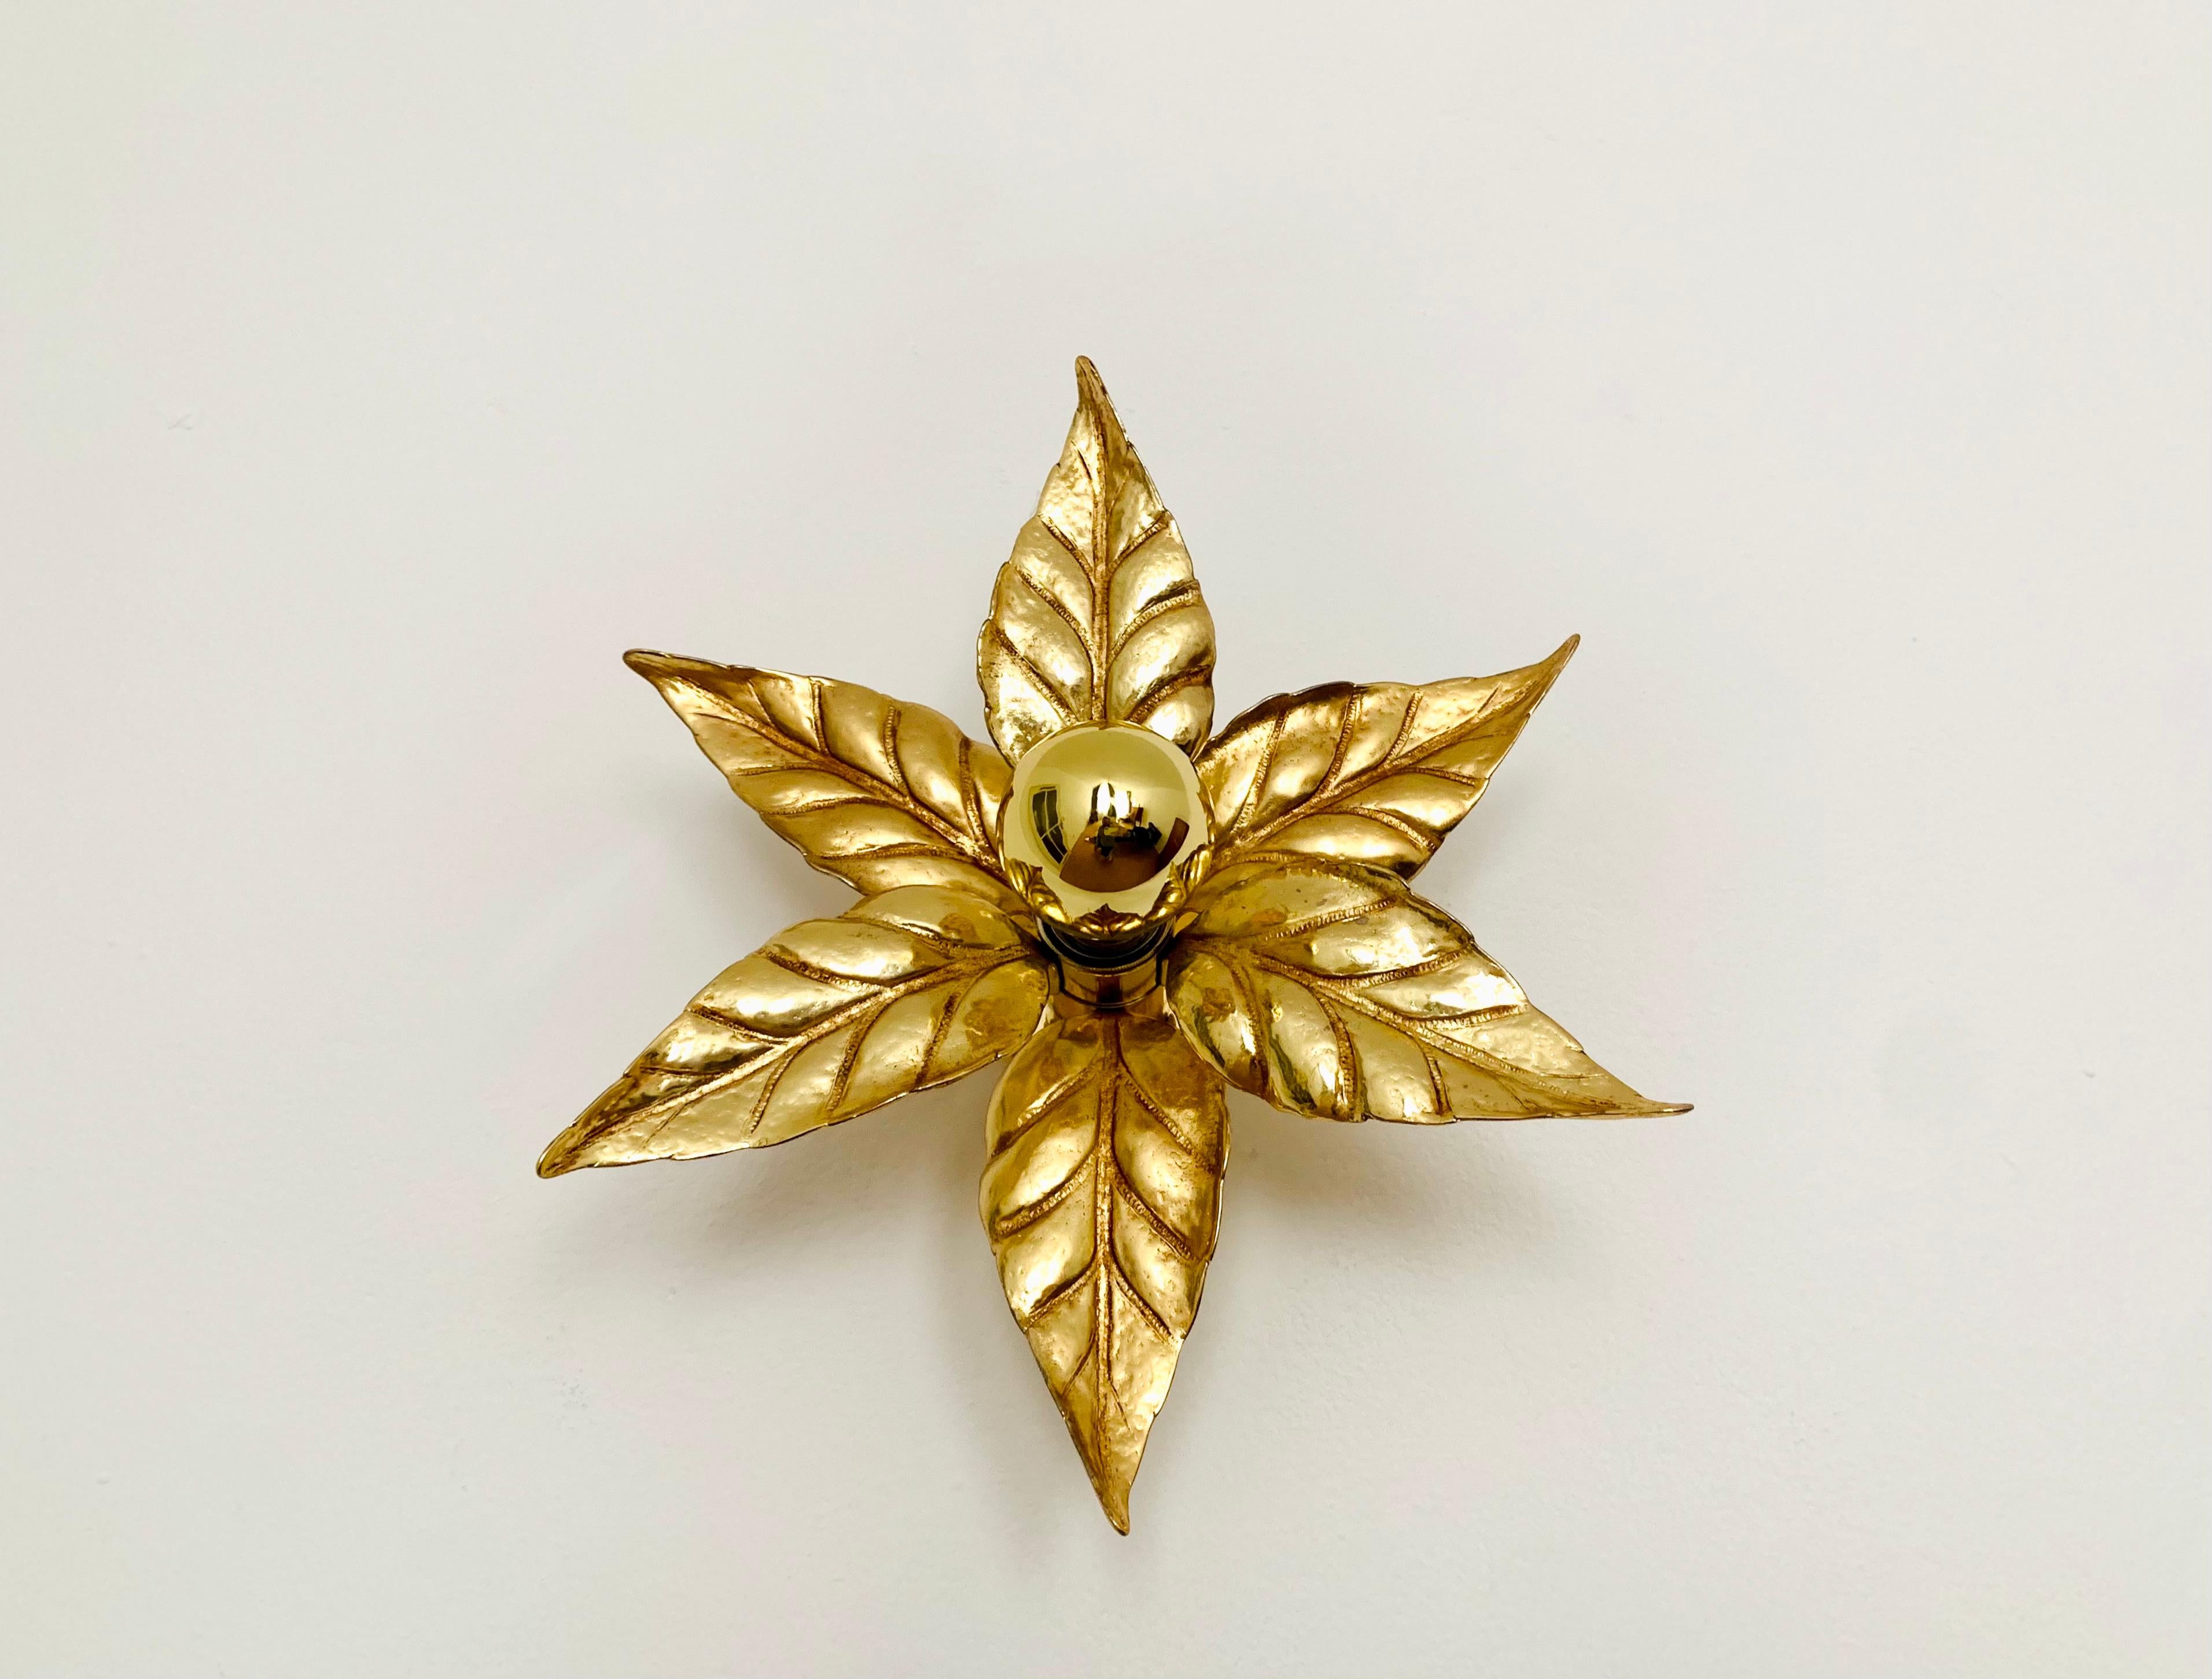 Exceptionally decorative floral wall lamp from the 1960s.
Great design and very solid workmanship.
The leaves create a spectacular light.

Design: Willy Daro
Manufacturer: Massive

Condition:

Very good vintage condition with slight signs